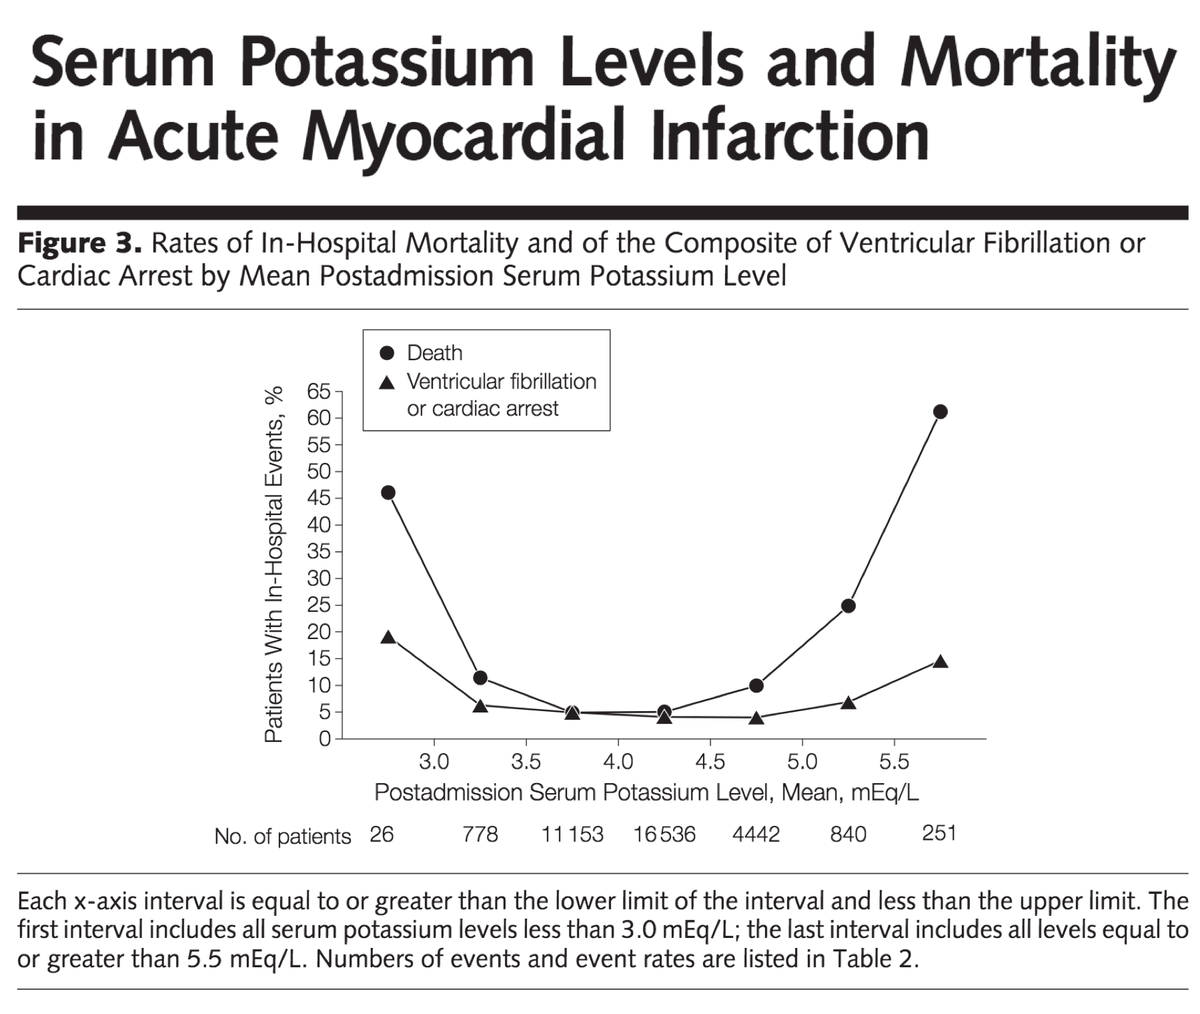 7/More contemporary data suggests that the "sweet spot" for potassium in AMI may include lower values:Risk of death is lowest between 3.5-4.5 mEq/L.Risk of VF is lowest between 3.0-5.0 mEq/L. https://www.ncbi.nlm.nih.gov/pubmed/22235086 